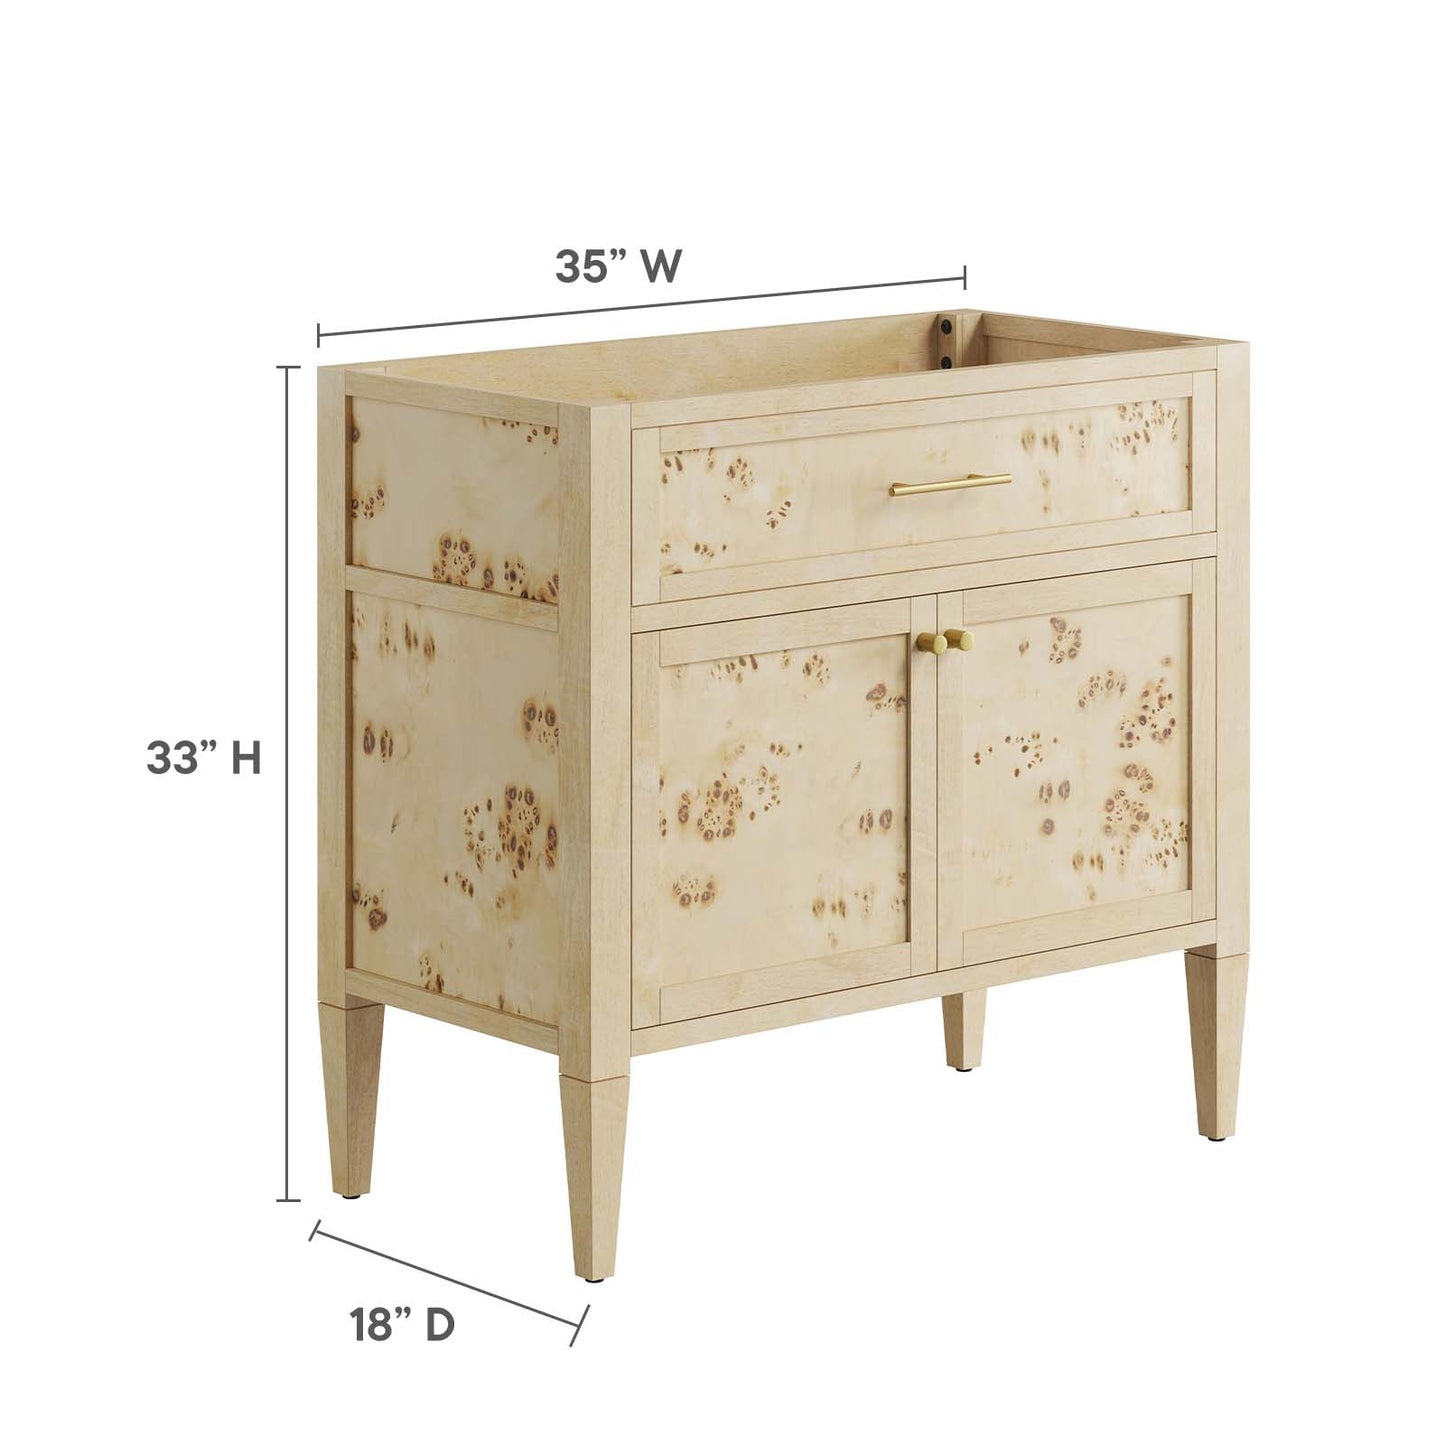 Elysian 36" Wood Bathroom Vanity Cabinet (Sink Basin Not Included) By Modway - EEI-6139 | Bathroom Accessories | Modway - 17